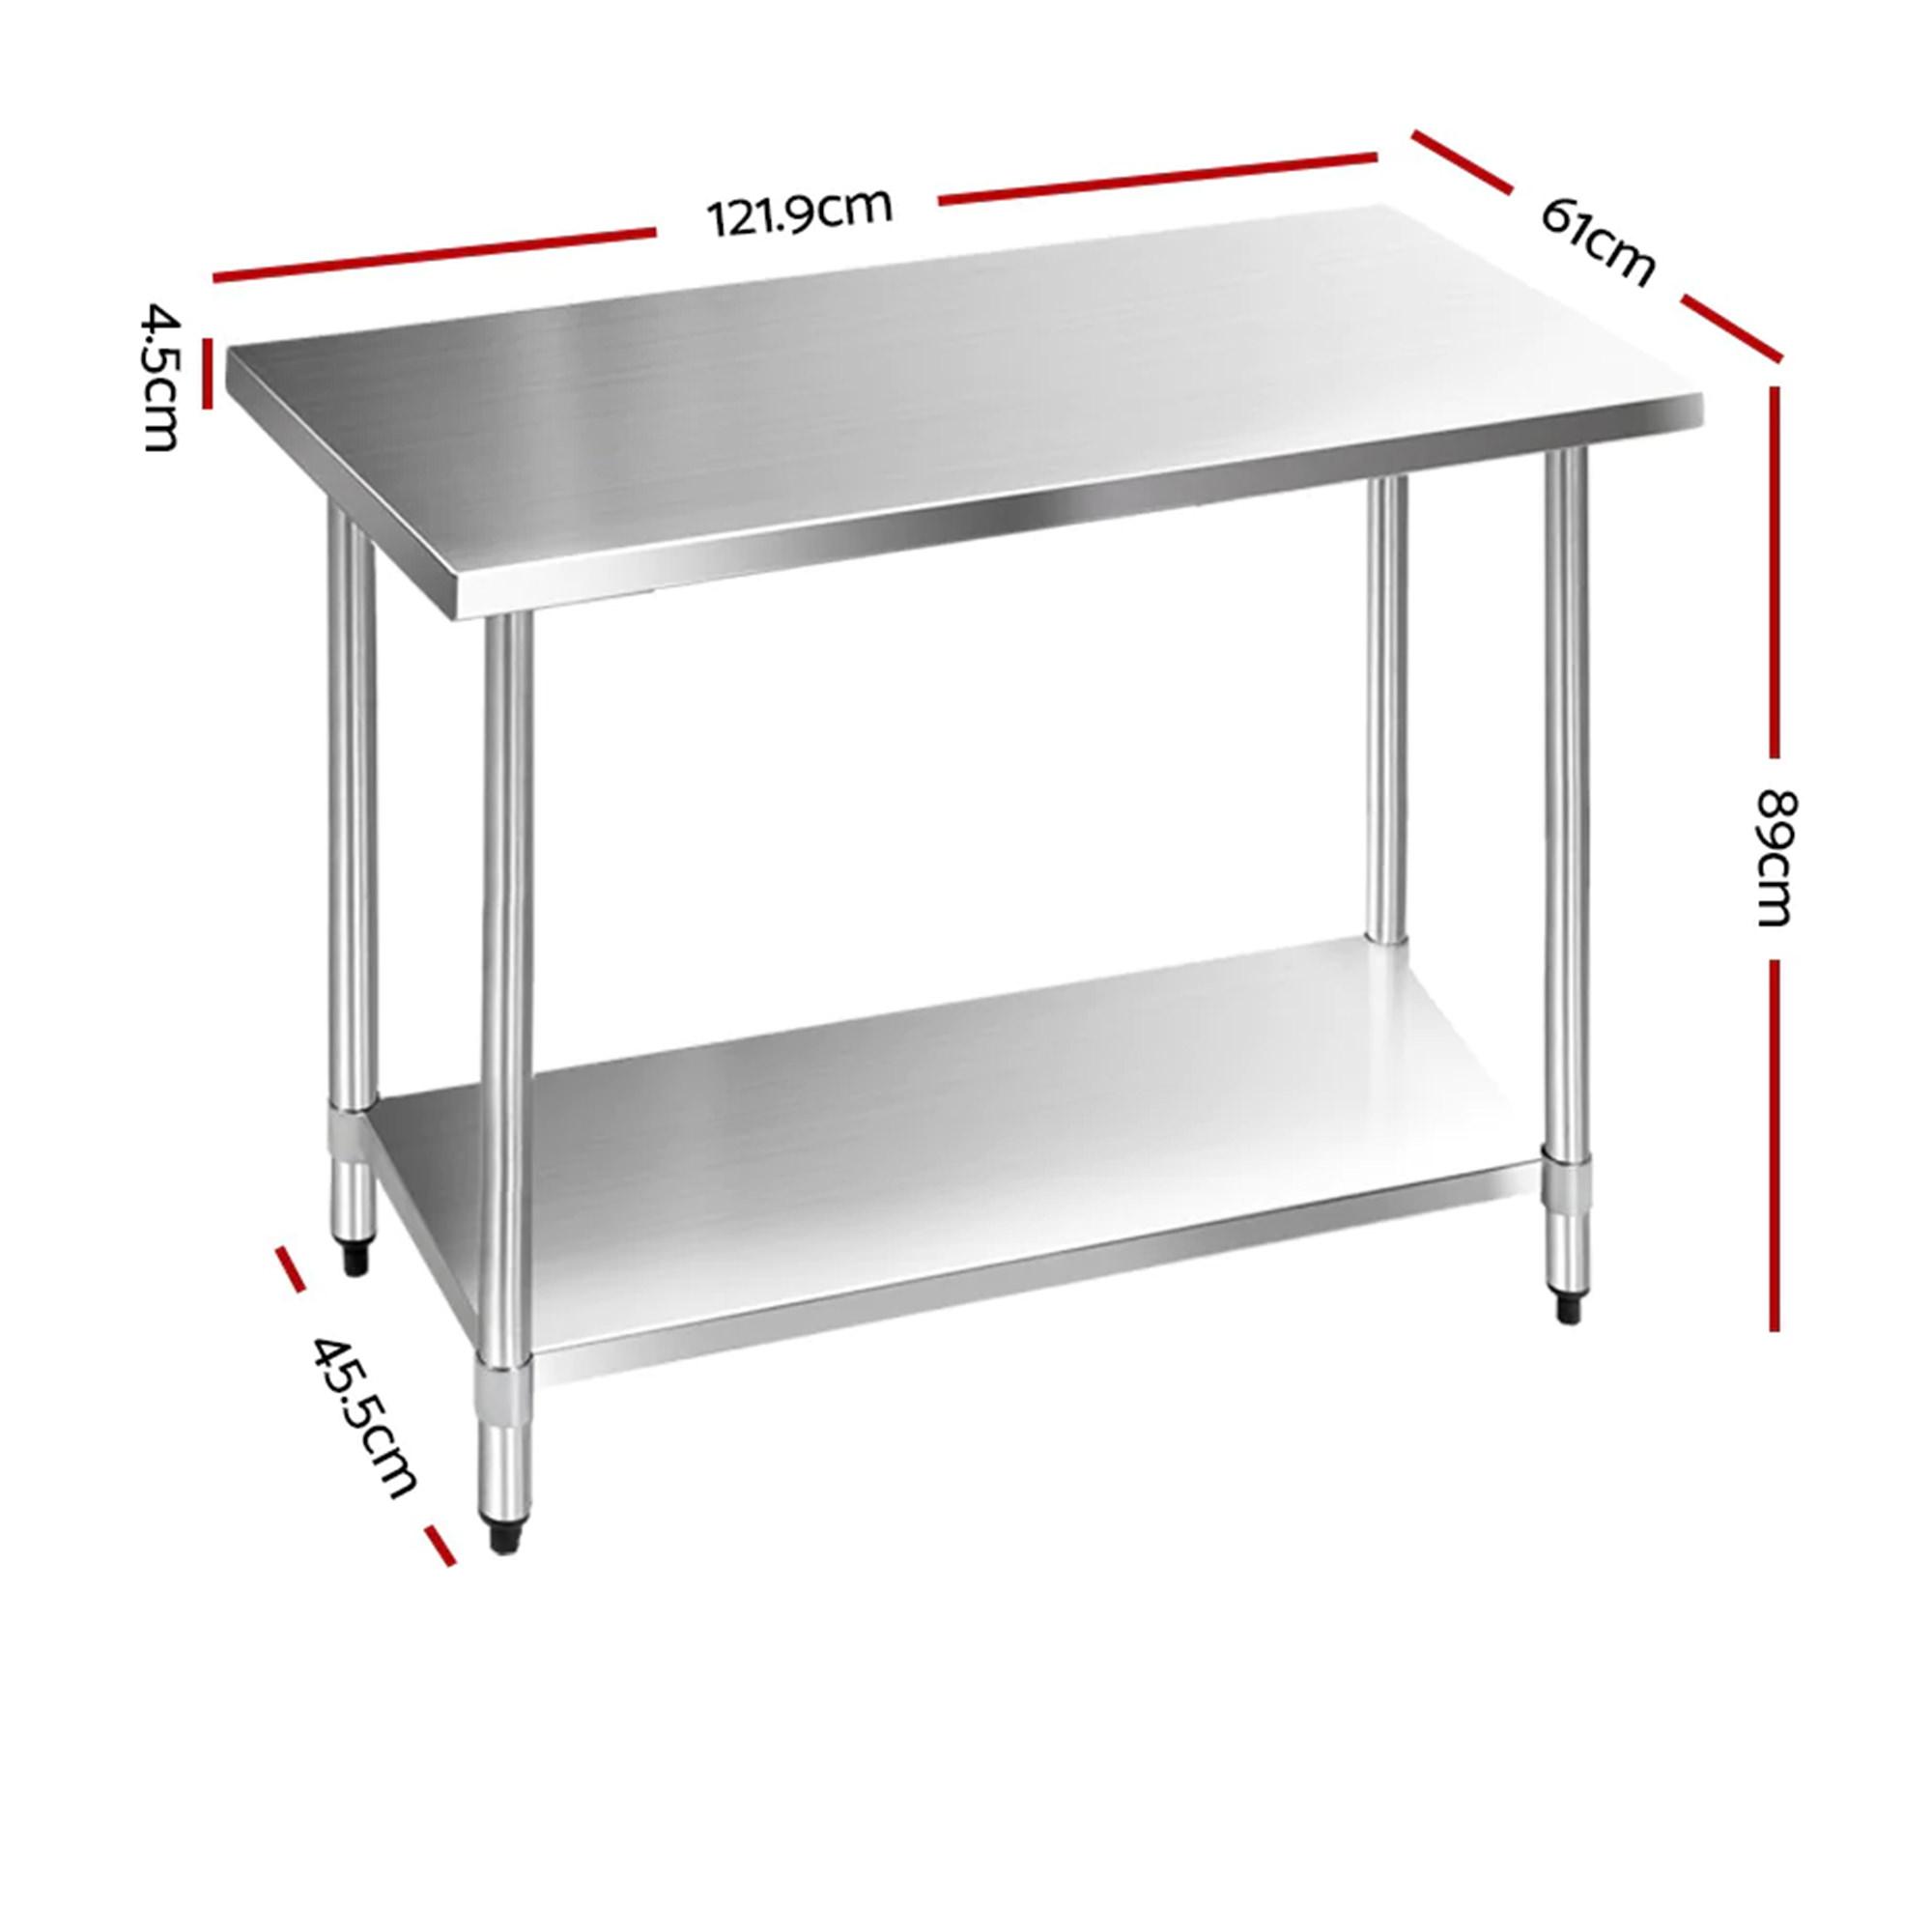 Cefito 430 Stainless Steel Kitchen Bench 121.9x61cm Image 3